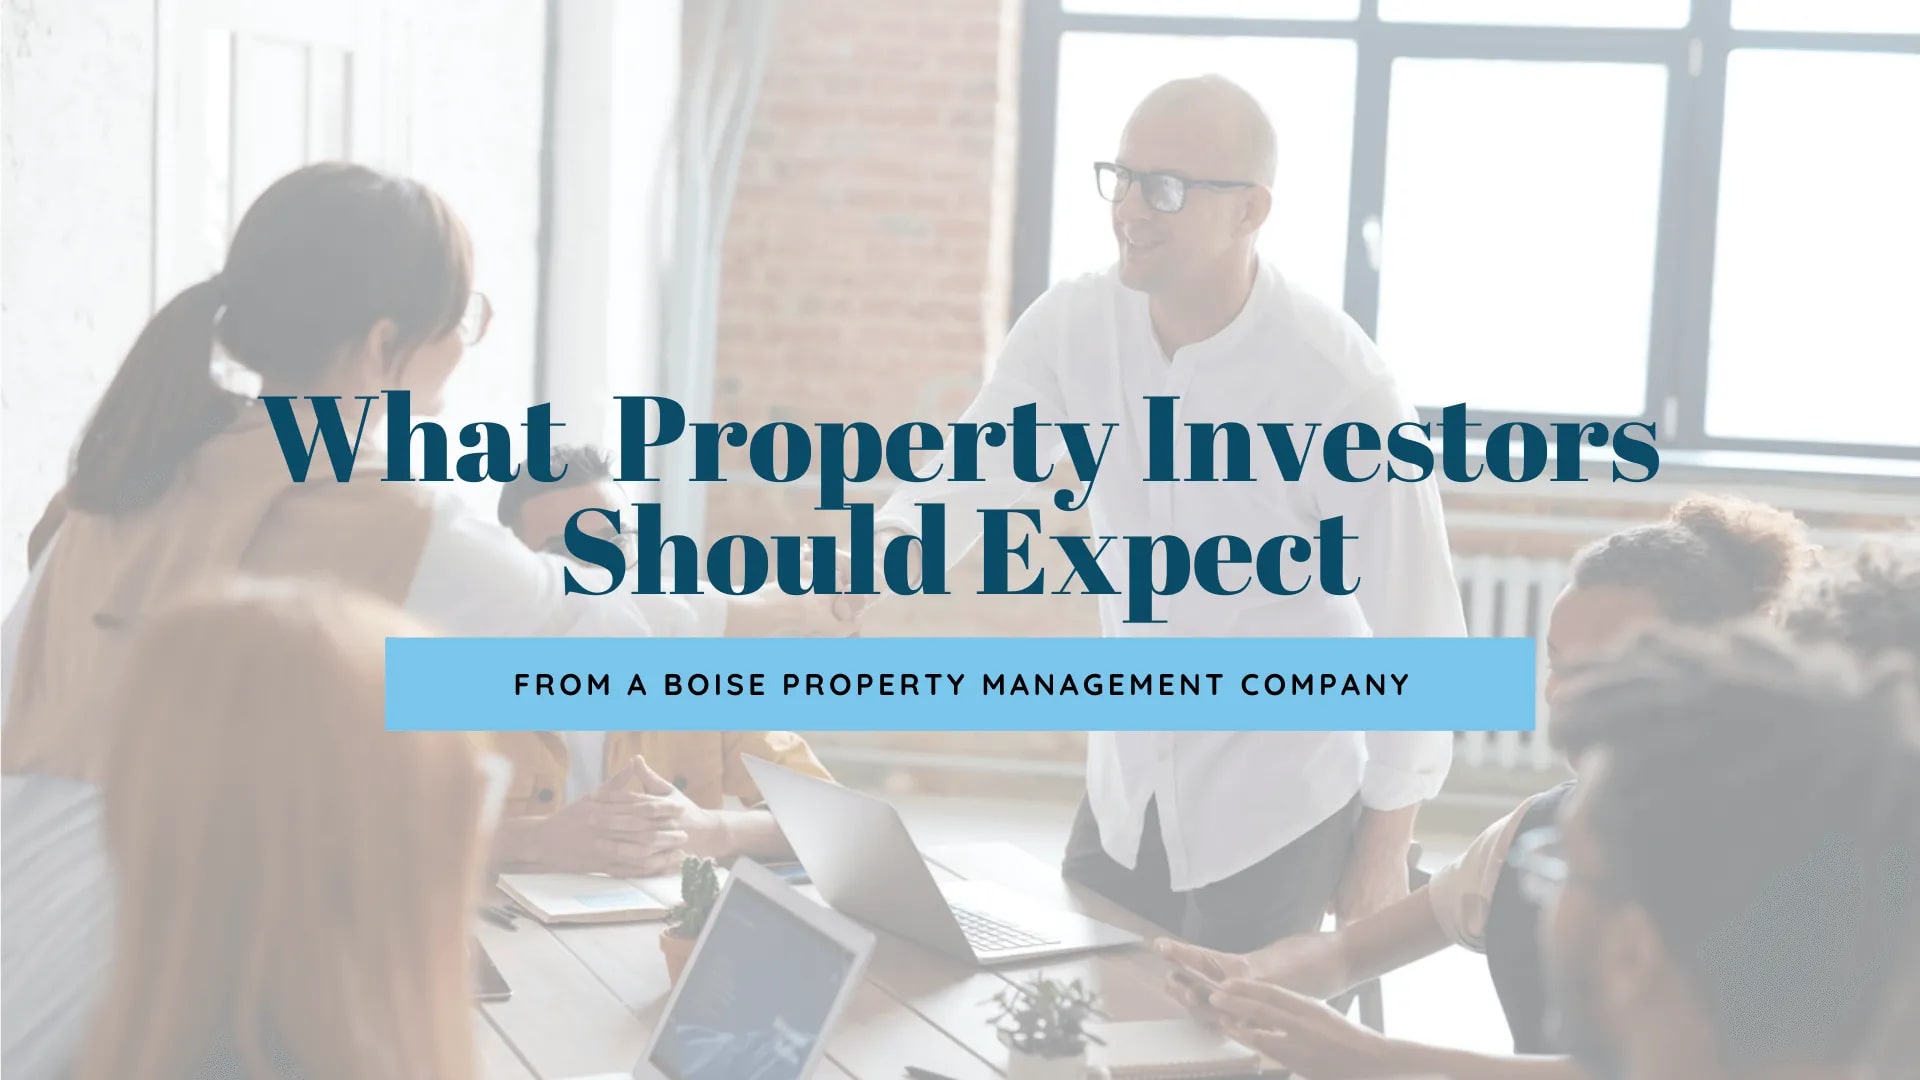 What Boise Property Investors Should Expect From a Property Management Company